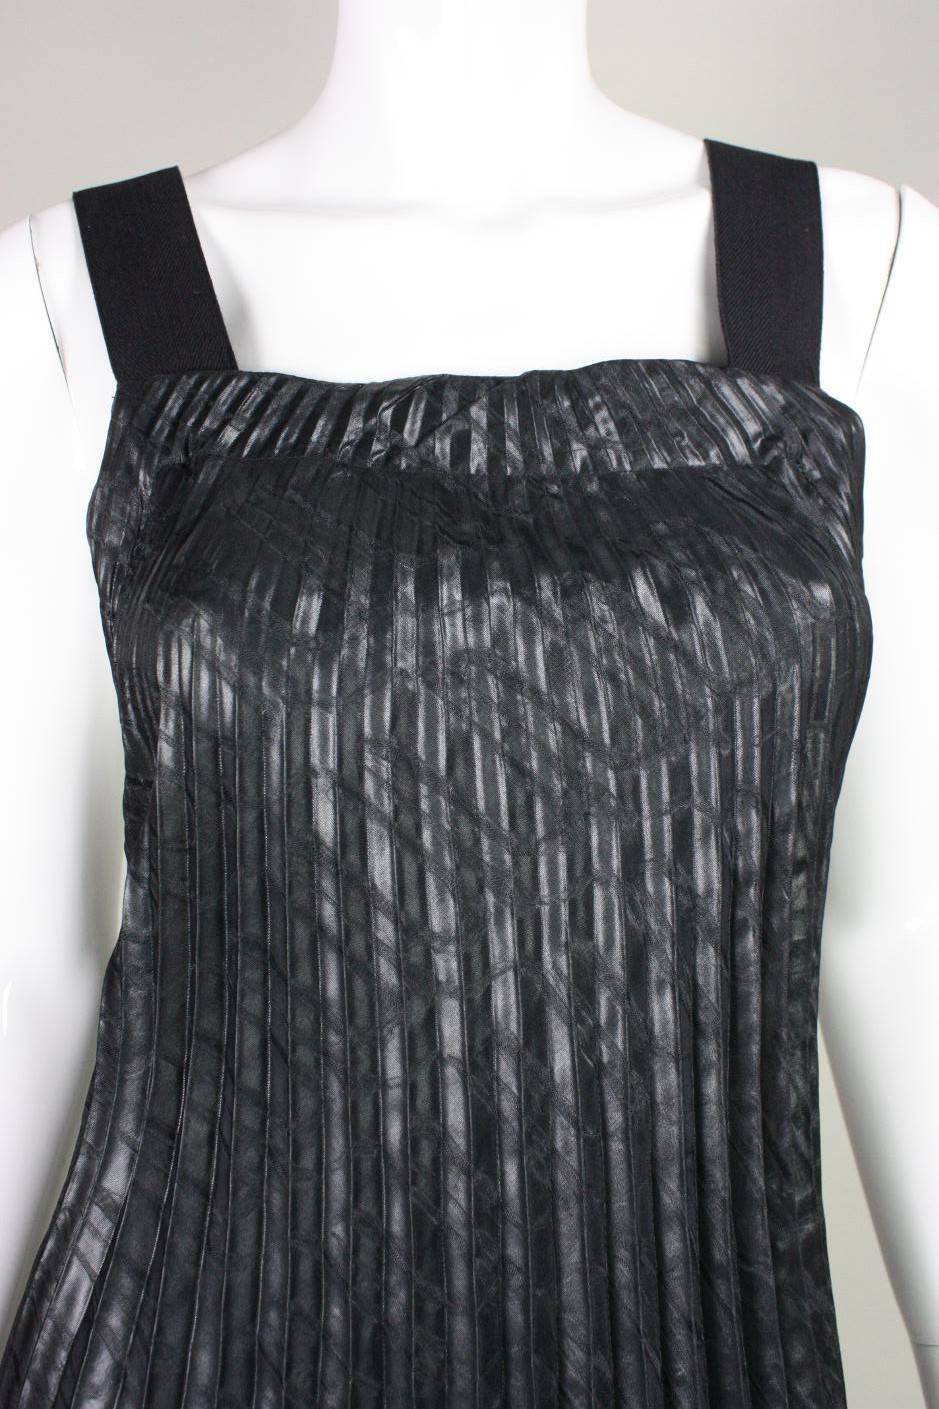 Marithe + Francois Girbaud Pleated Pinafore Dress For Sale 1